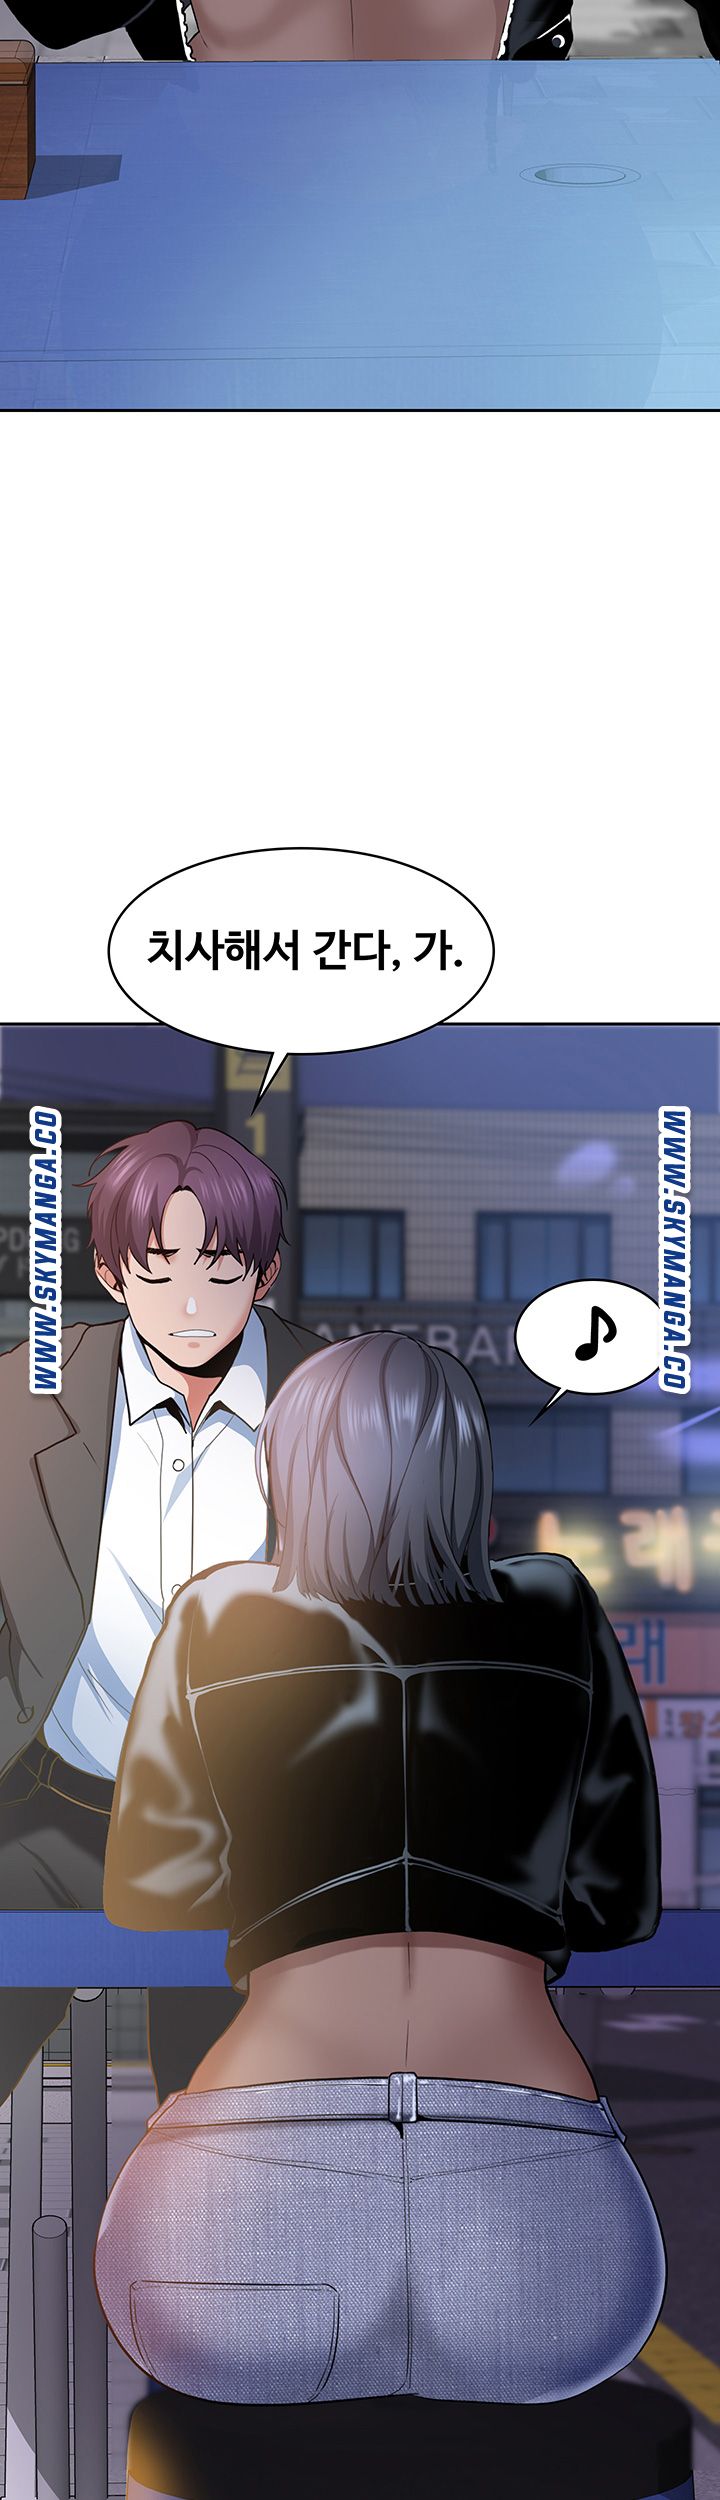 Wanna Service (Do You Want a Service?) Raw - Chapter 2 Page 13